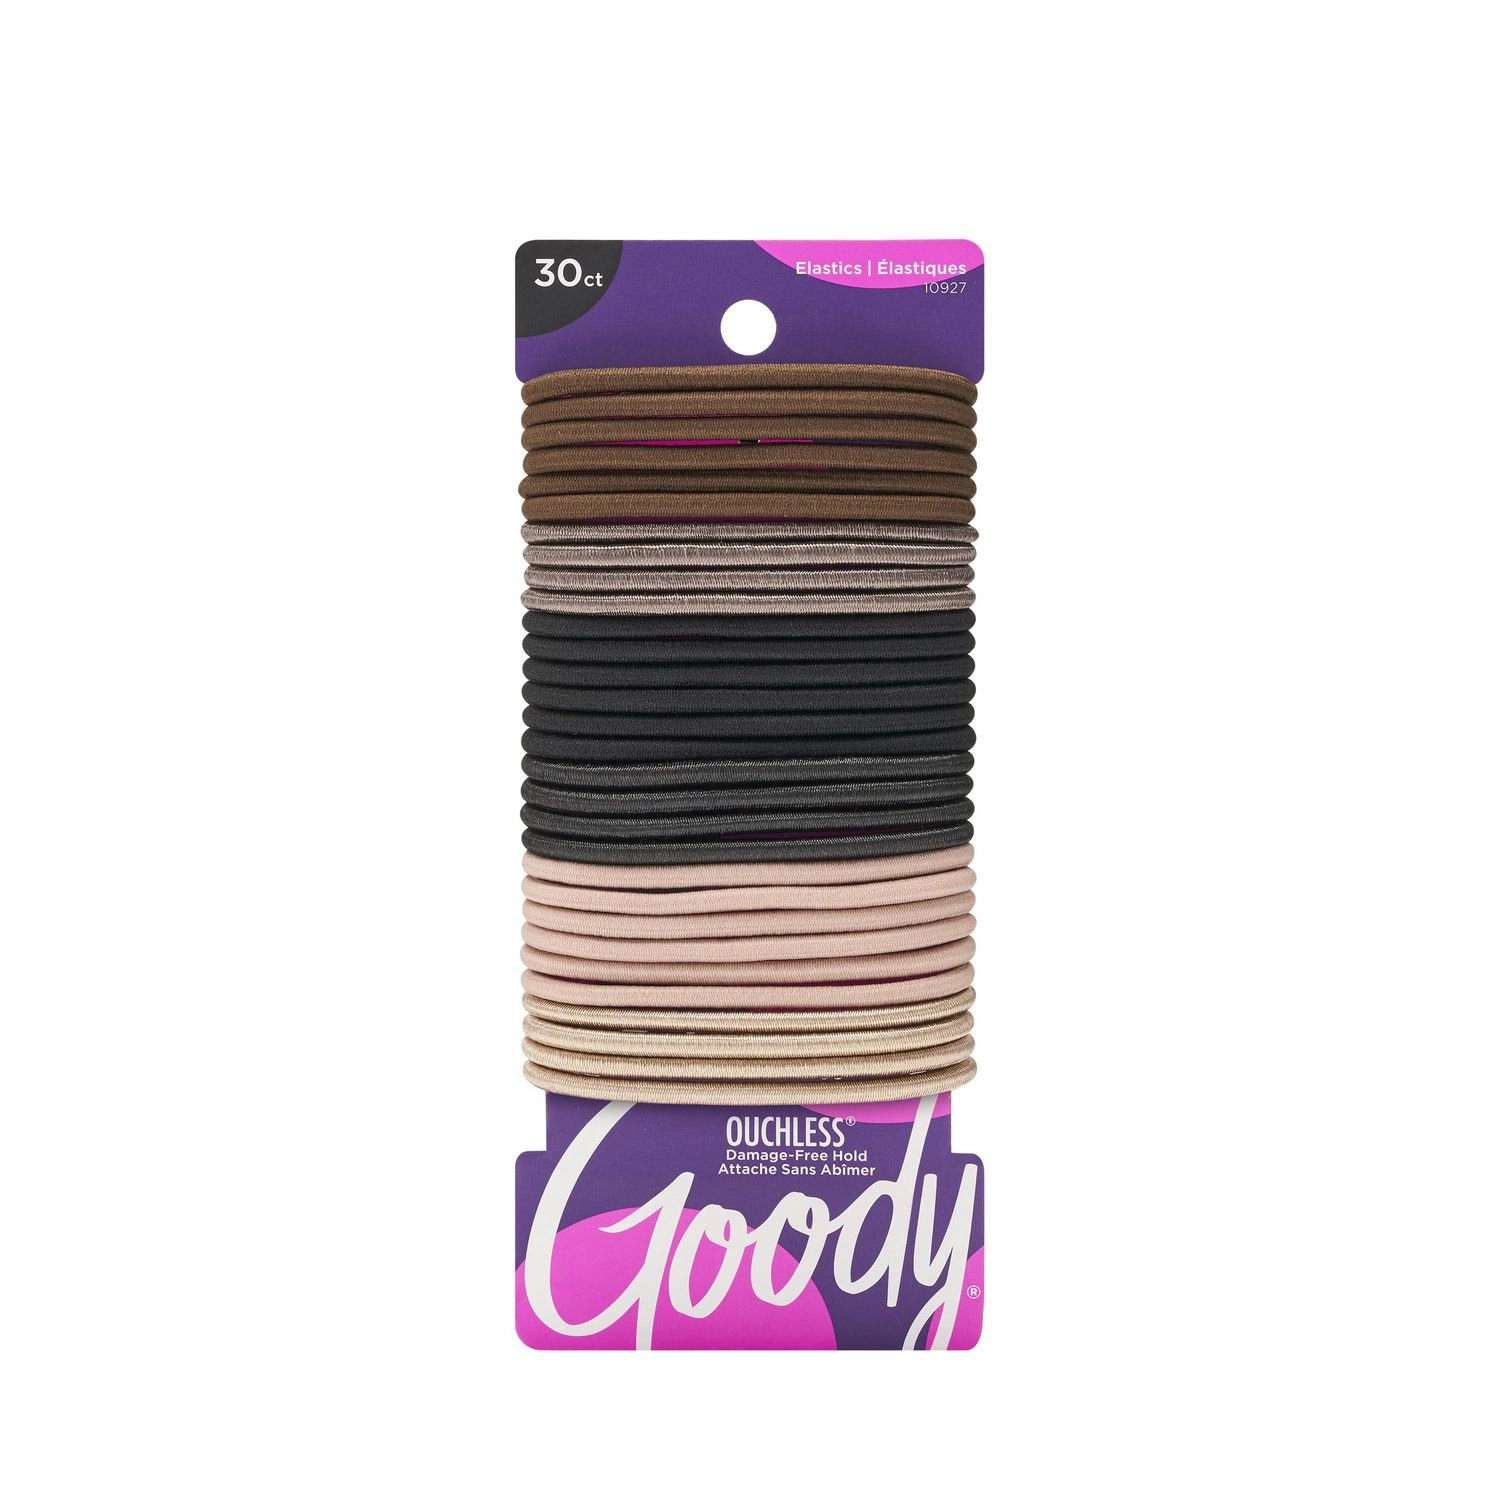 Goody Ouchless 4mm Elastics Starry Nights 30ct UPC: 041457109274 Pack:72/3